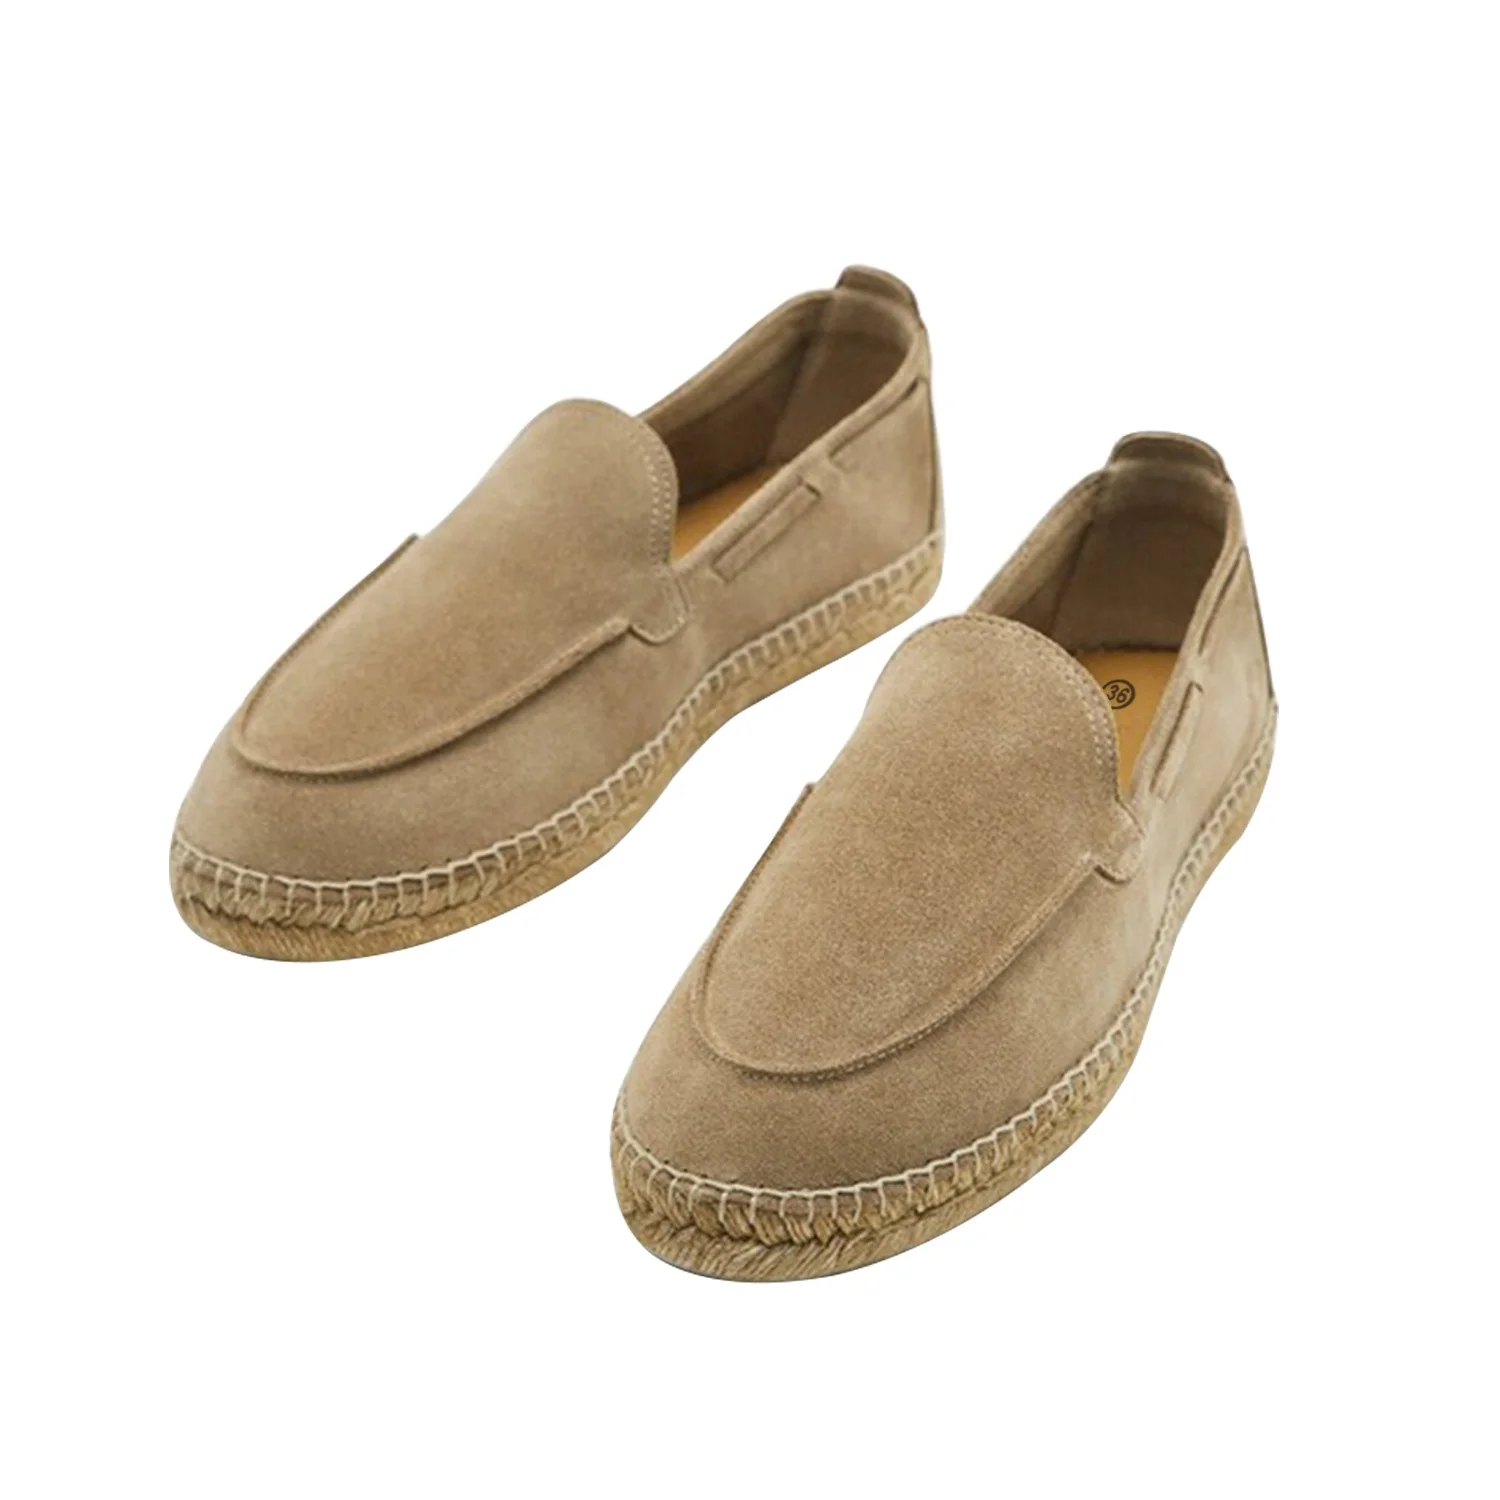 

Wholesale Fashion High Quality Shoes Women Slip On Walking Style Ladies Espadrilles Loafers Women Flats Shoes